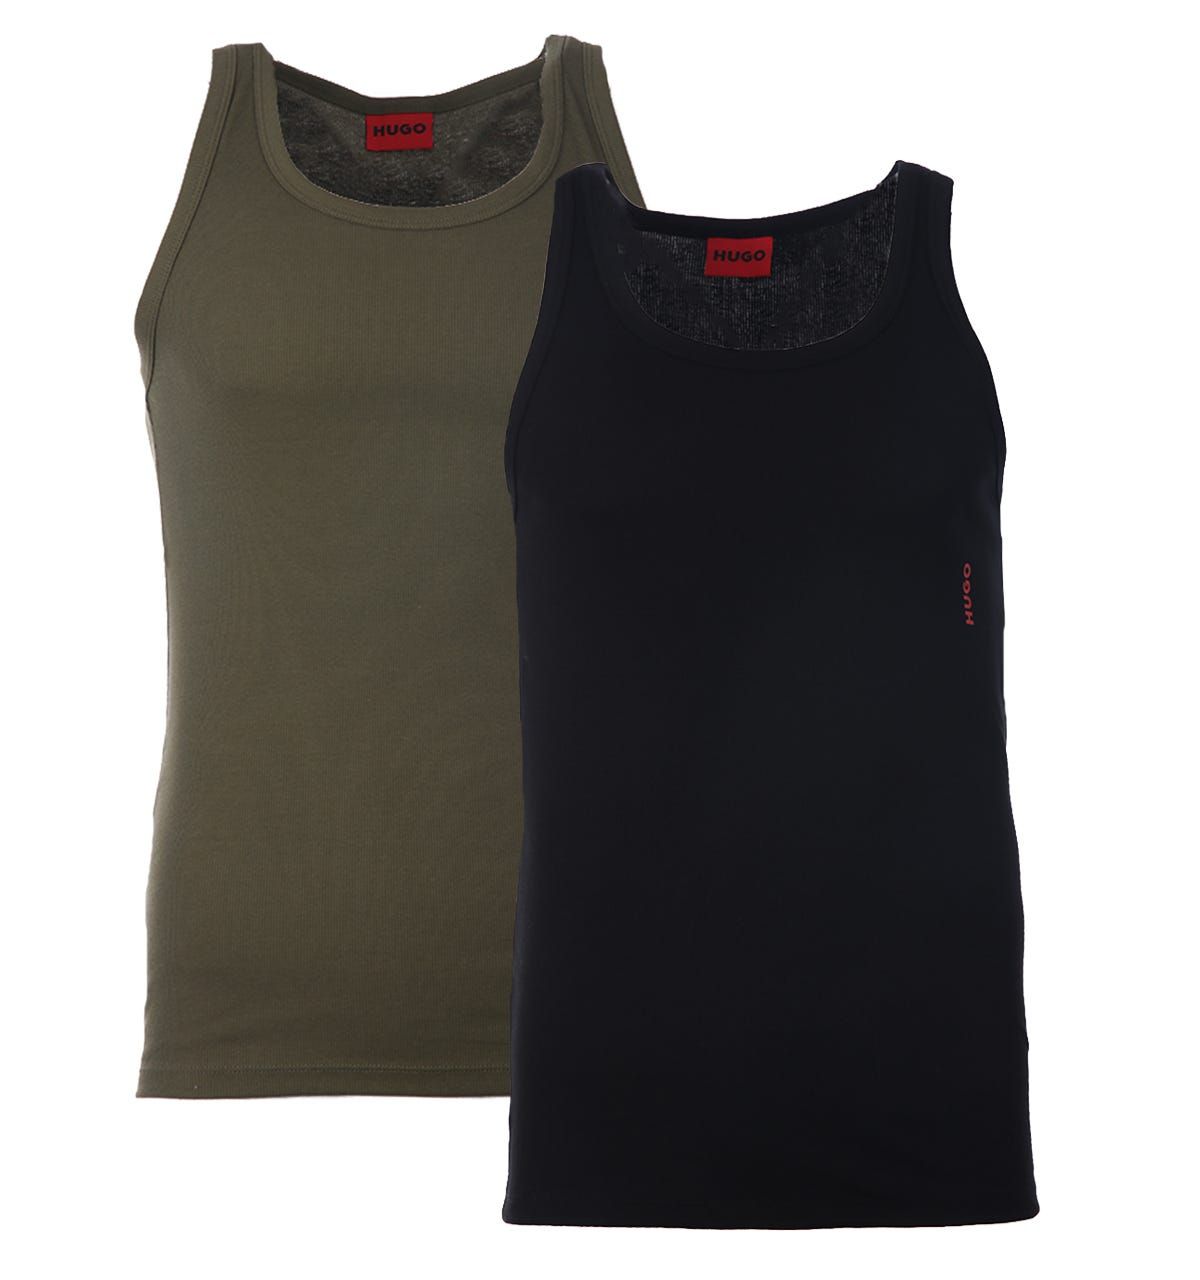 An essential for your wardrobe, this two-pack of vests from HUGO offers unmatched comfort that'll see you through the day. The slim fitting hugs the body, so it can be easily hidden underneath a shirt for that extra layer of warmth. Crafted from stretch cotton with a ribbed construction for optimum movement and breathability. Finished with signature HUGO branding. Two Pack, Slim Fit , Stretch Cotton, Ribbed Construction , Round Neckline, HUGO Branding . Composition & Care:95% Cotton 5% Elastane, Machine Wash.